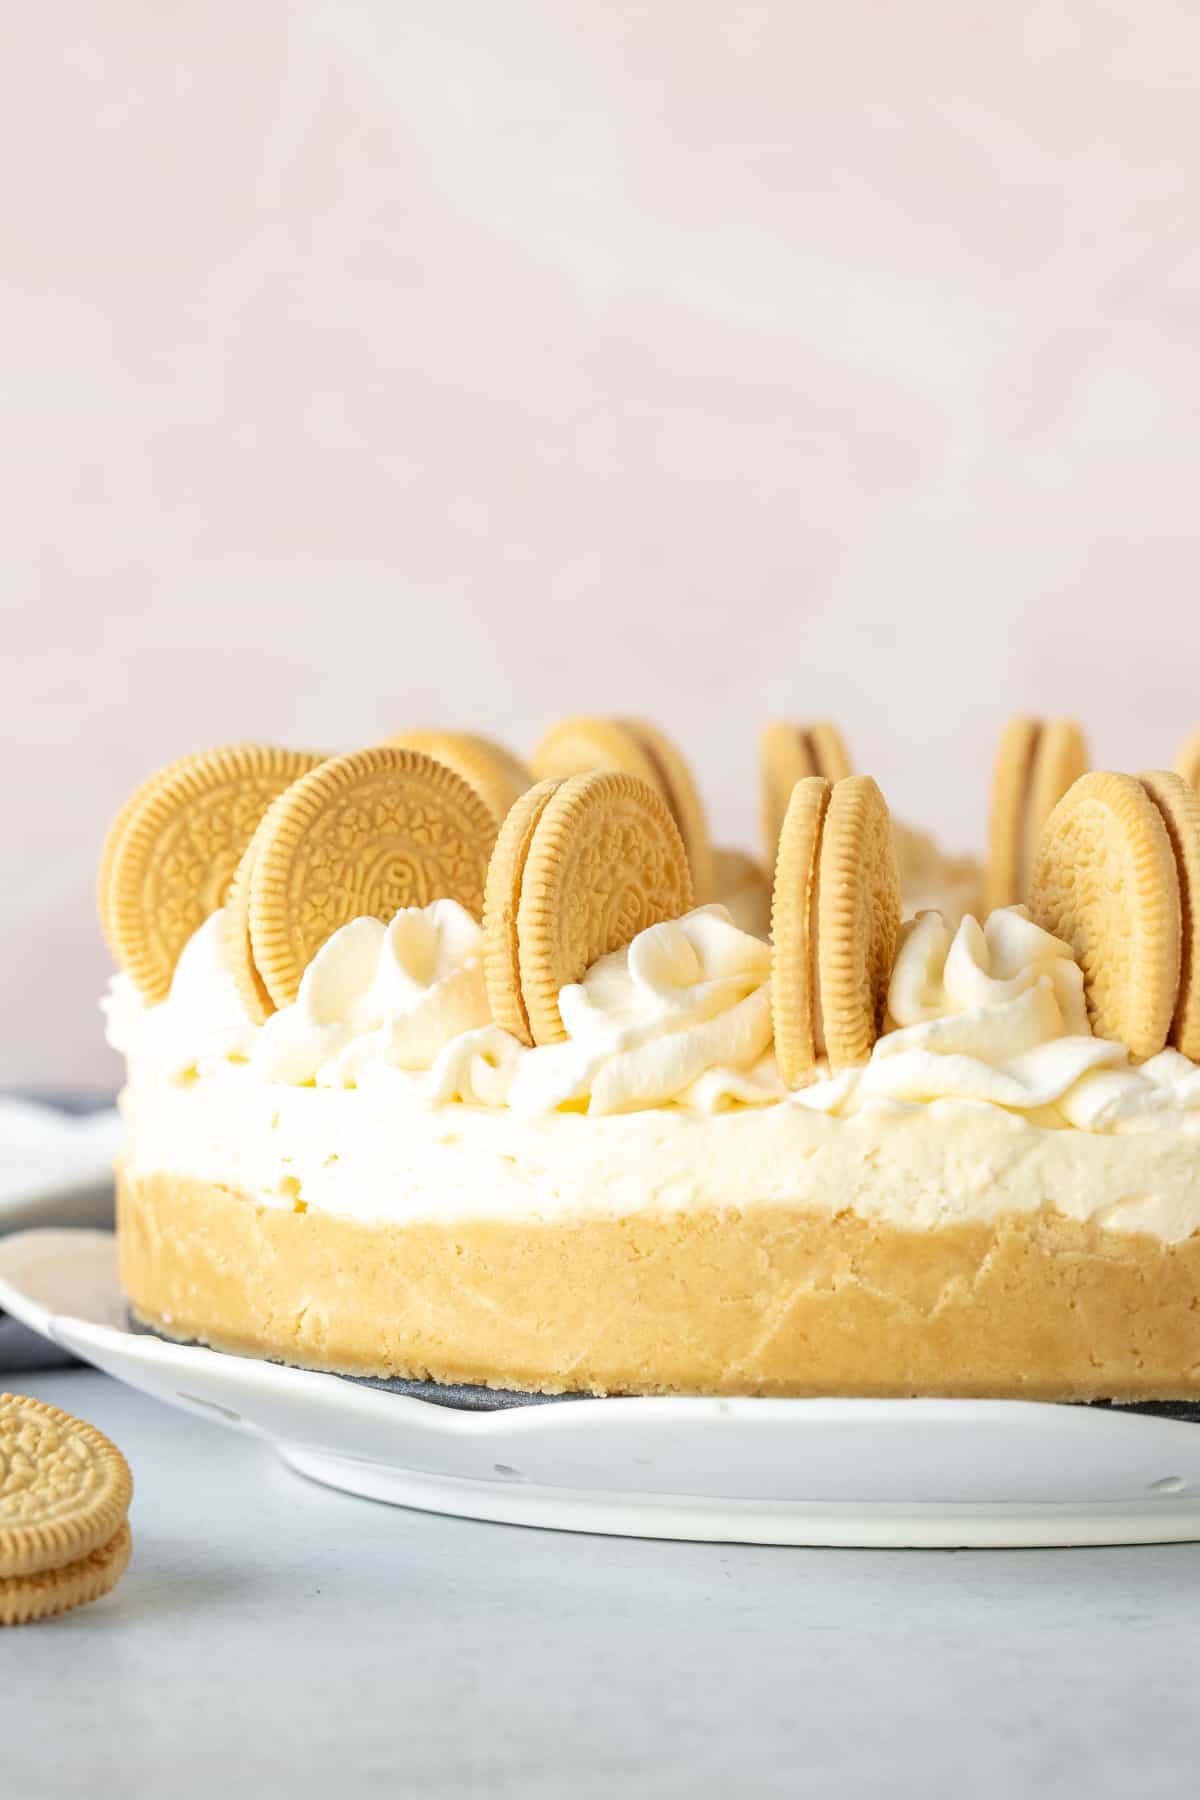 9-inch round no-bake Golden Oreo Cheesecake, decorated with whipped cream and cookies